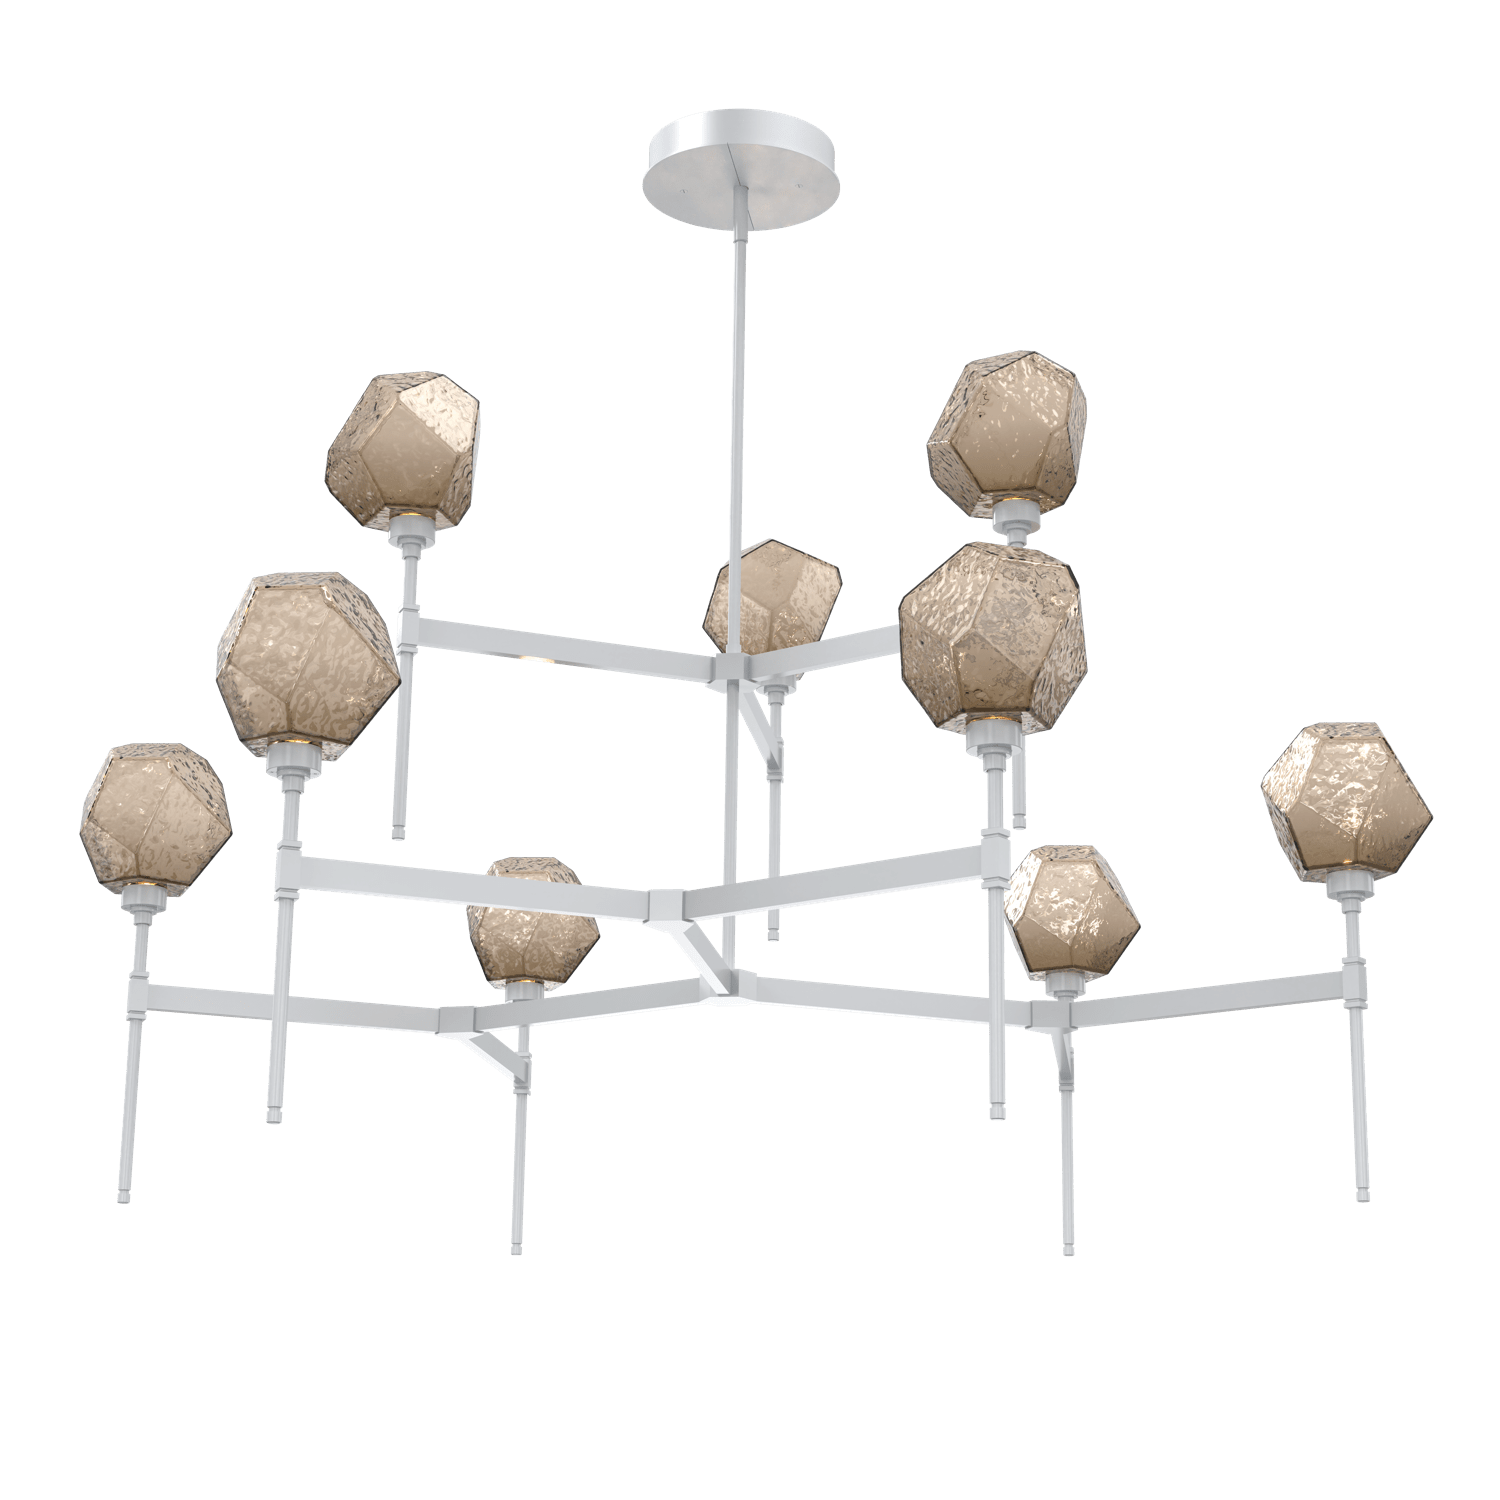 CHB0039-55-CS-B-Hammerton-Studio-Gem-round-two-tier-belvedere-chandelier-with-classic-silver-finish-and-bronze-blown-glass-shades-and-LED-lamping